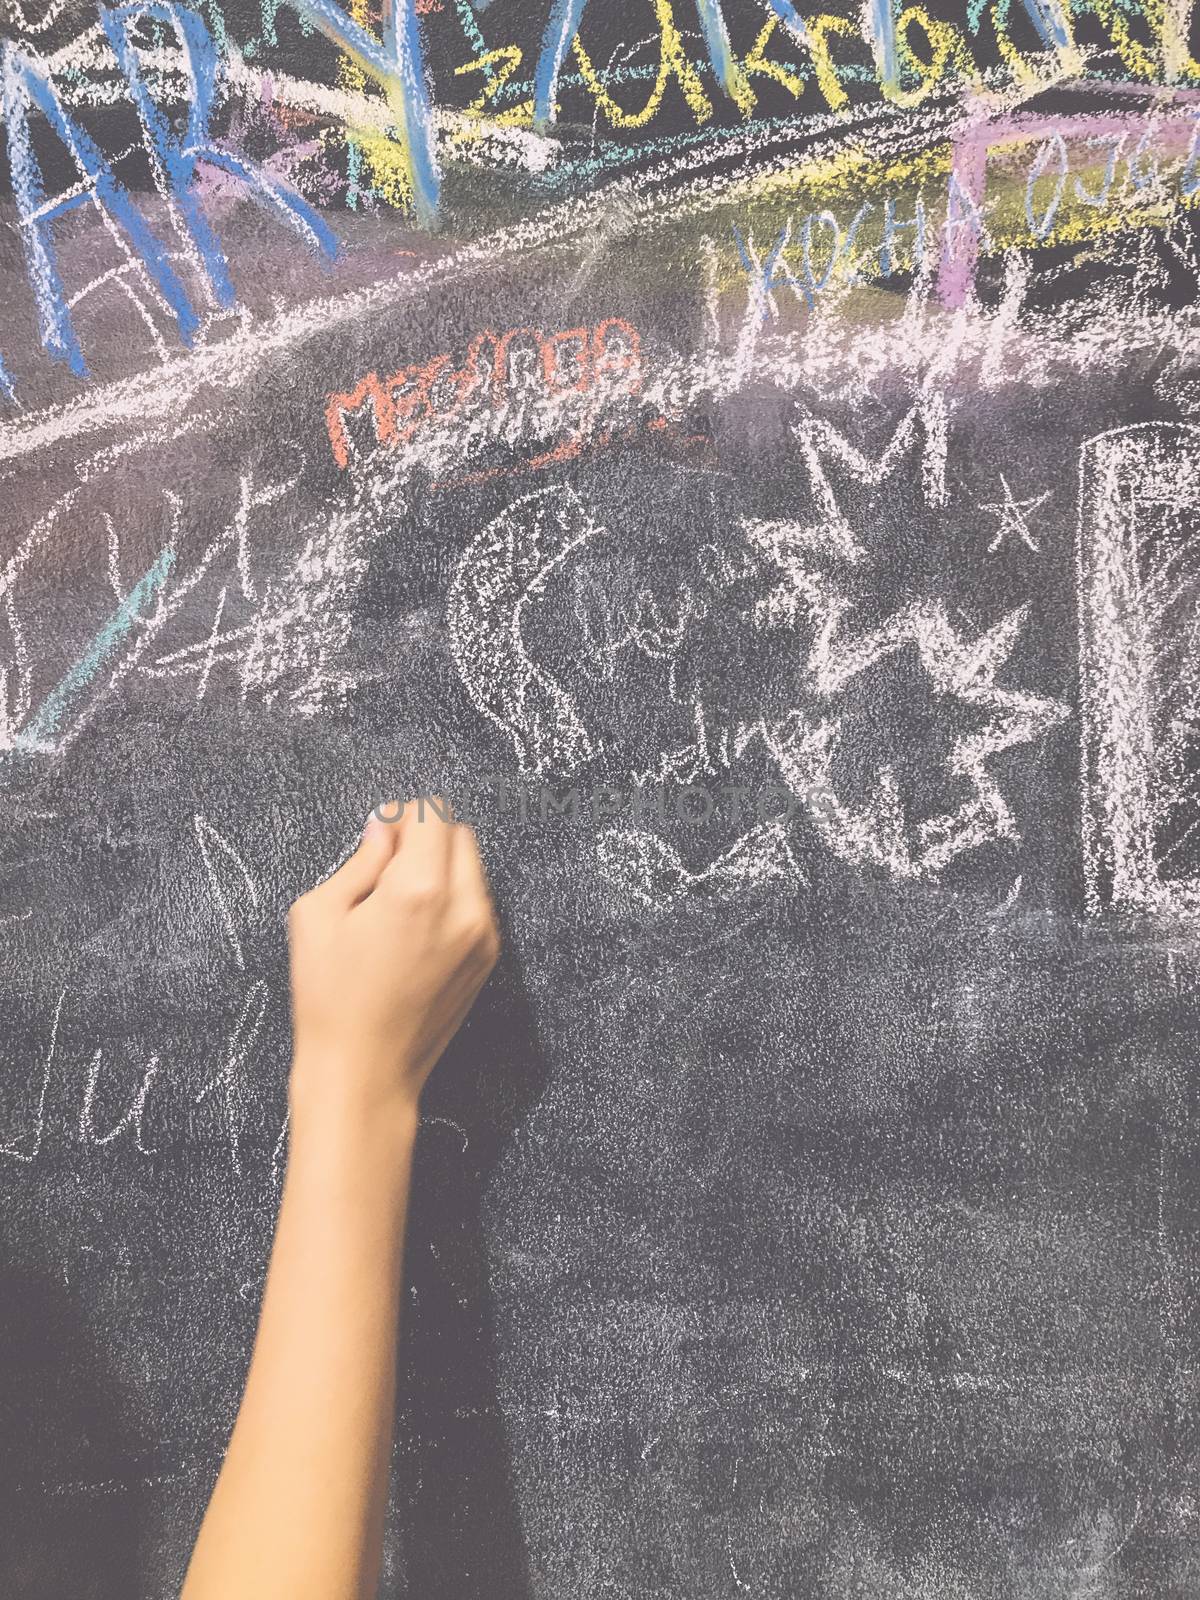 A child paints by chalk on a school board by Softulka